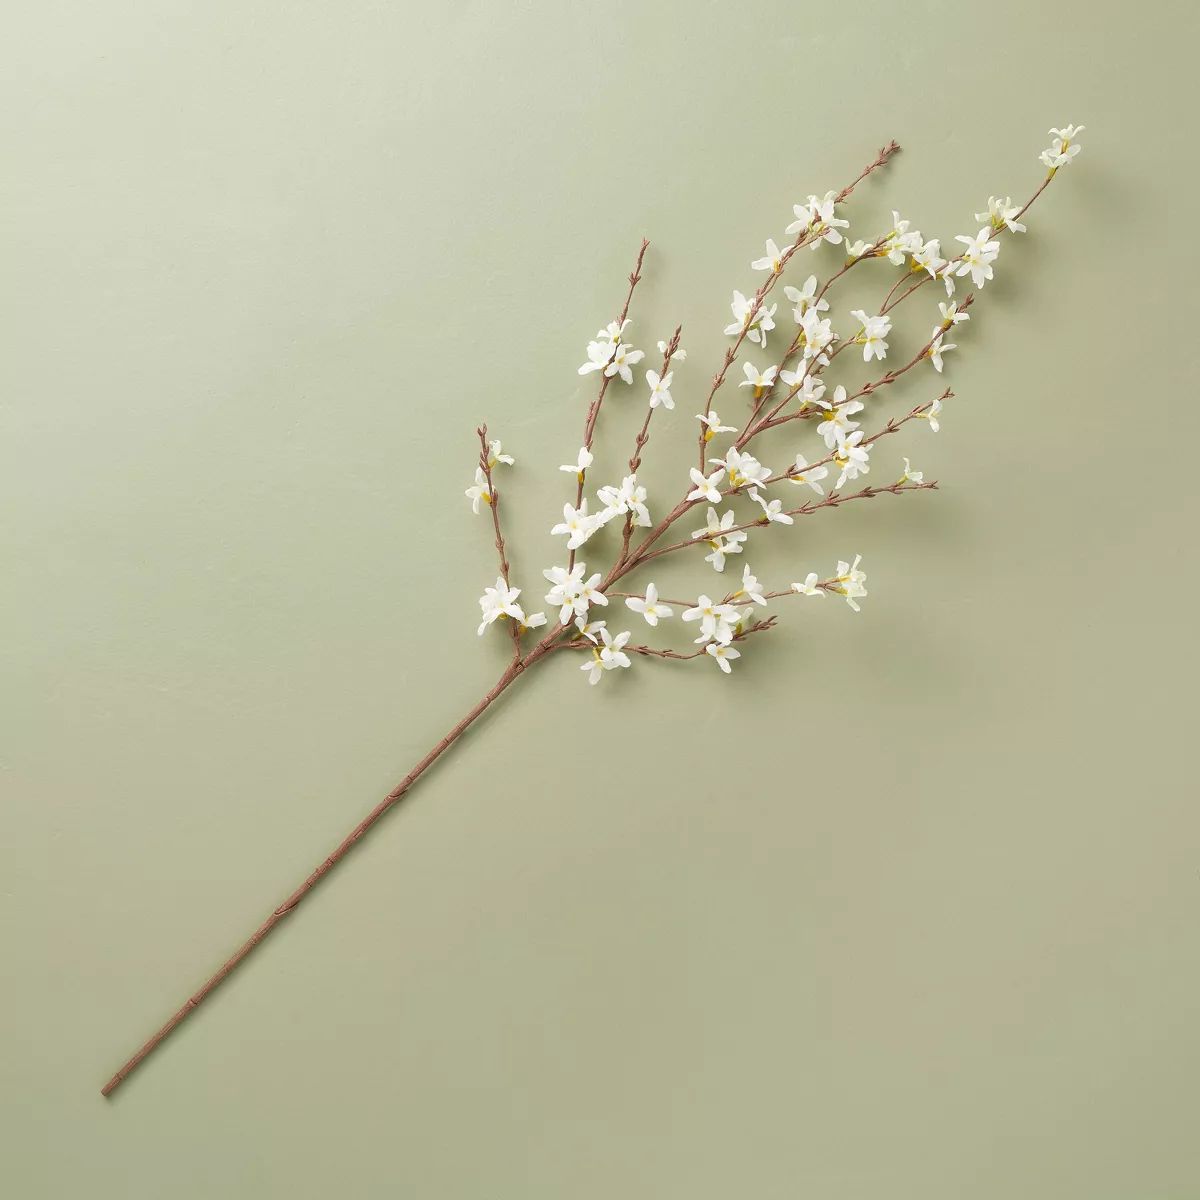 36" Faux Forsythia Flowering Branch - Hearth & Hand™ with Magnolia | Target